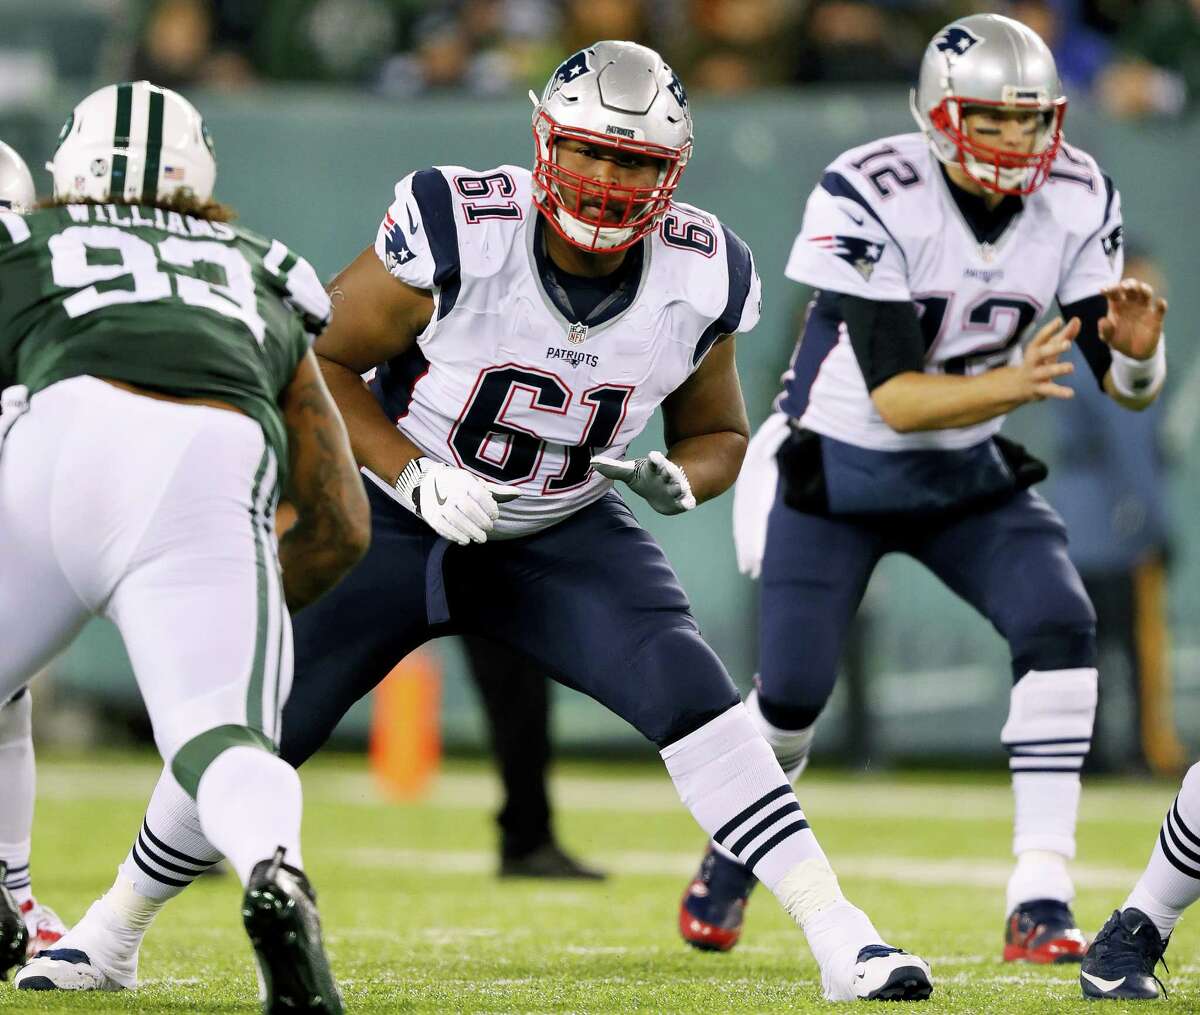 New England Patriots offensive tackle Marcus Cannon blocks against the New York Jets during an NFL football game at MetLife Stadium in East Rutherford, N.J. Sunday, Nov. 17, 2016.